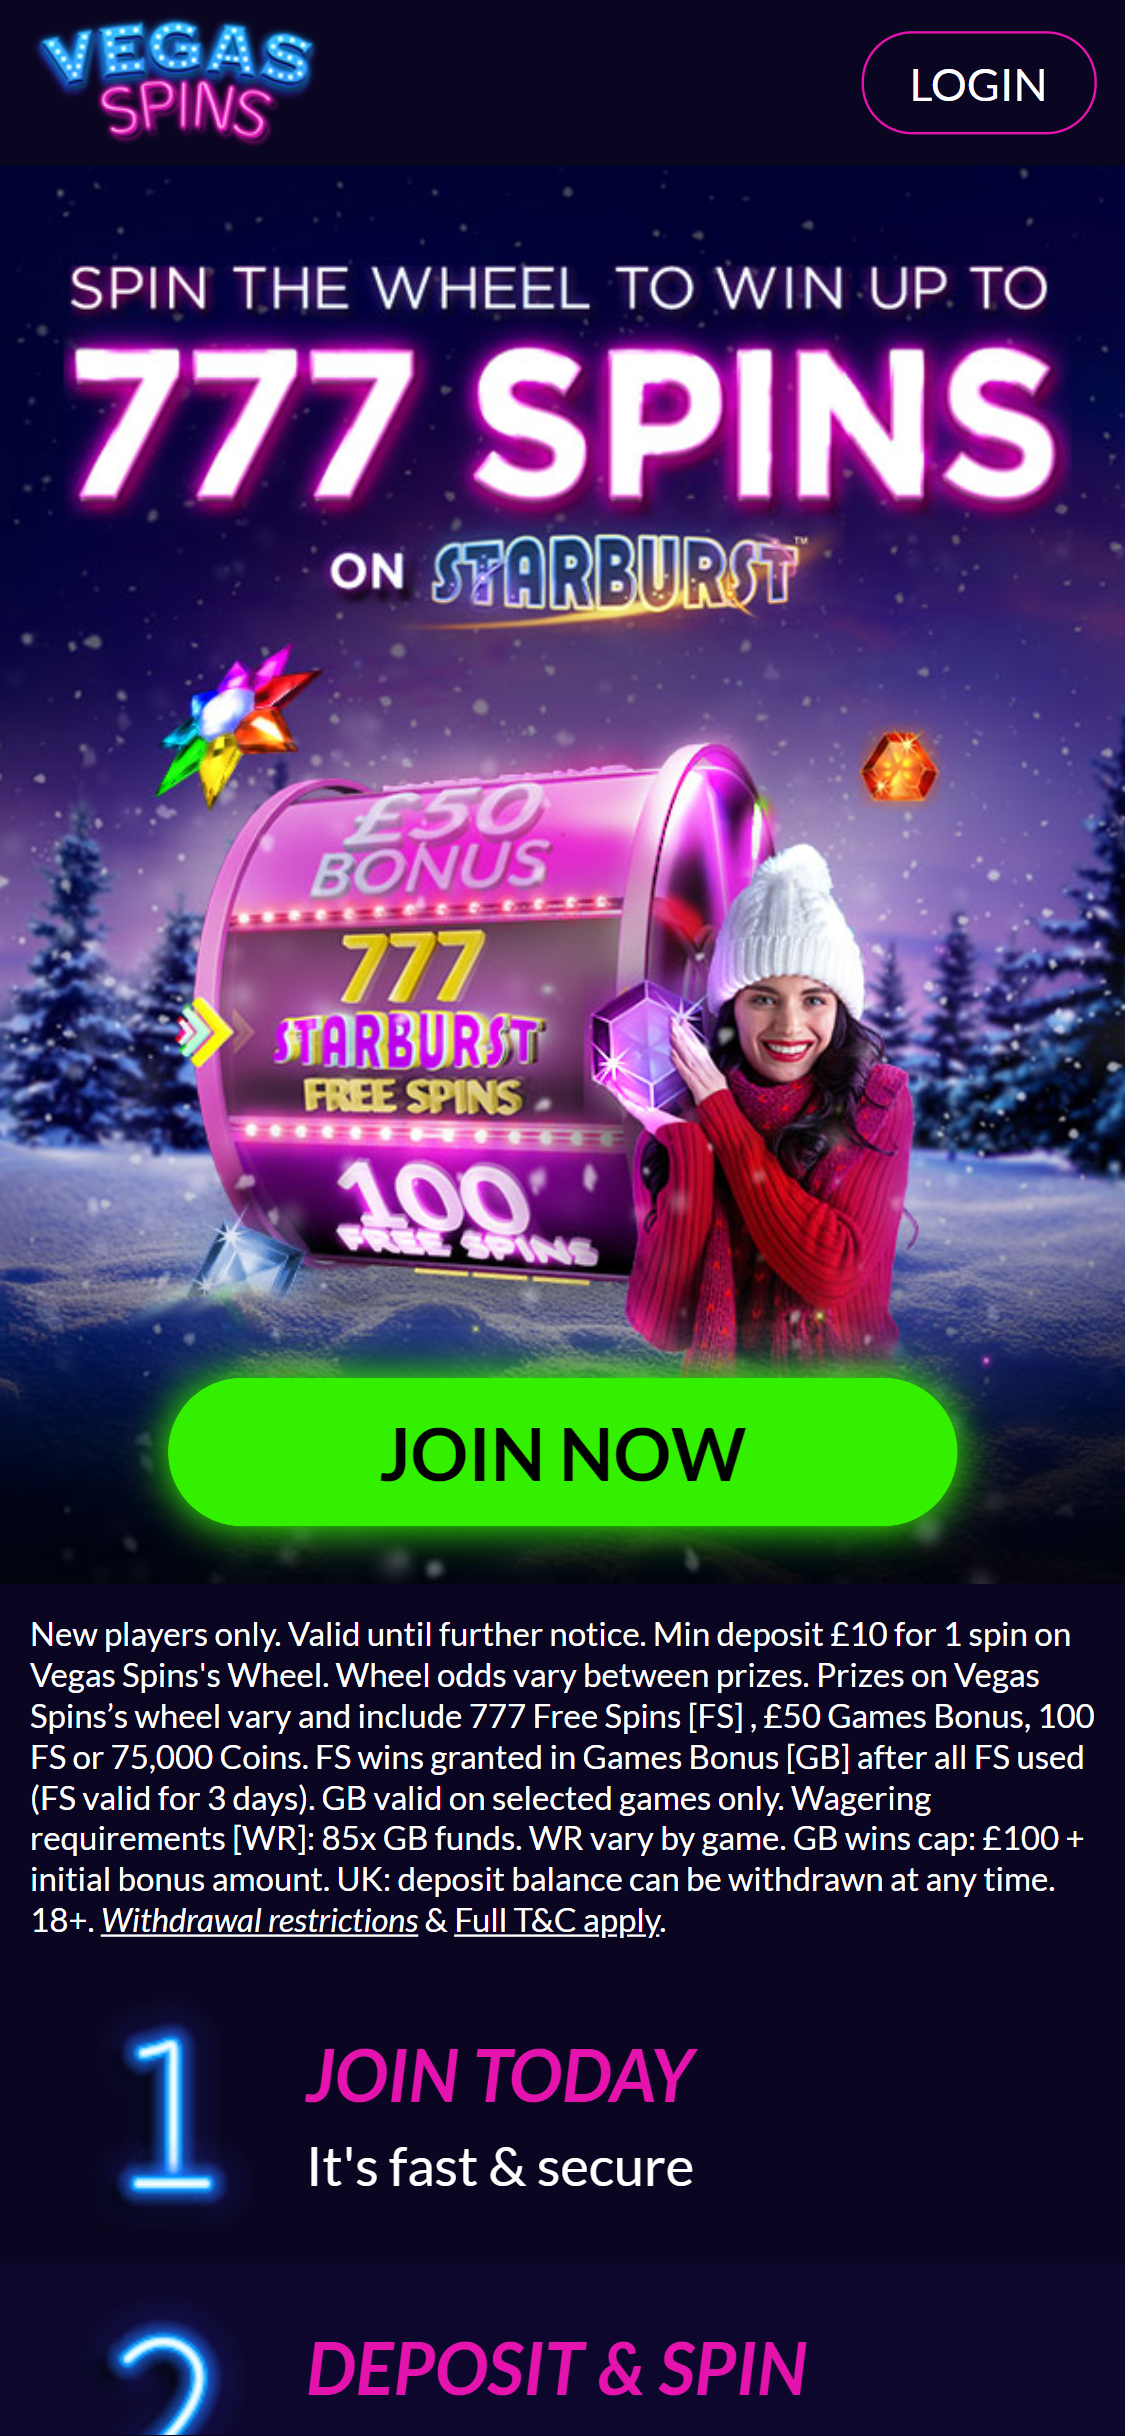 Vegas Spins Casino Mobile Review